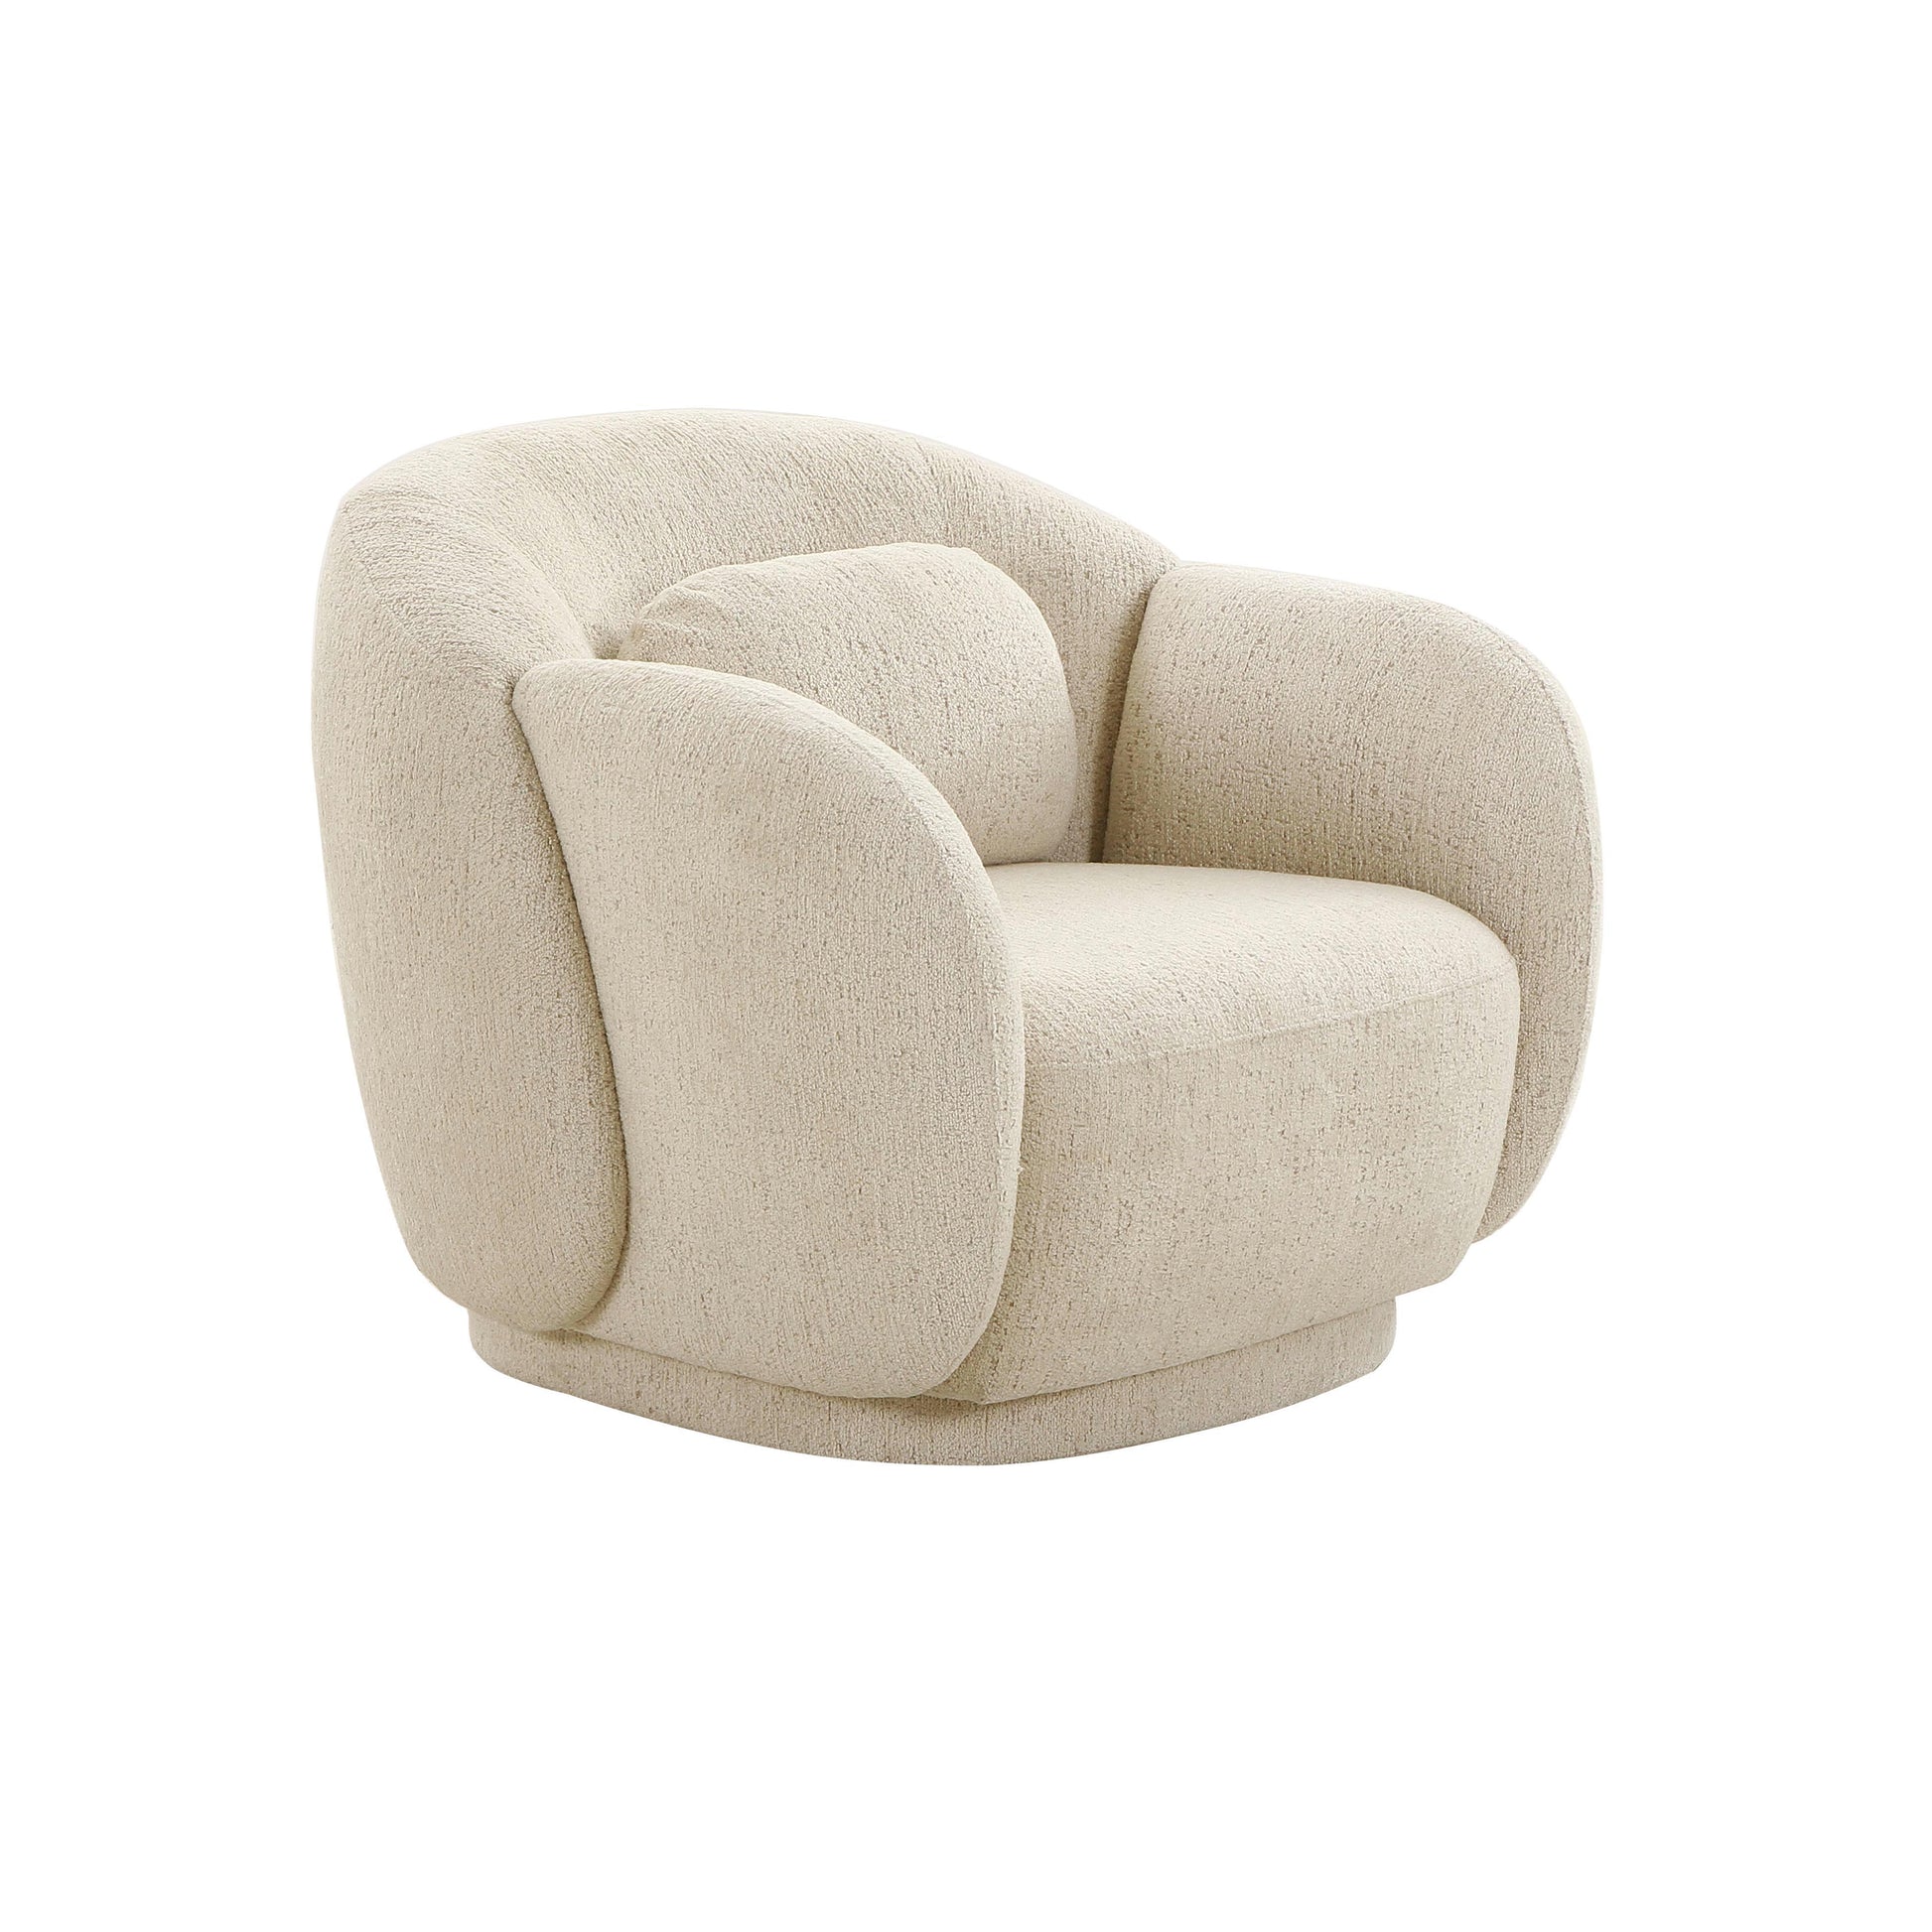 Tov Furniture Misty Cream Boucle Accent Chair